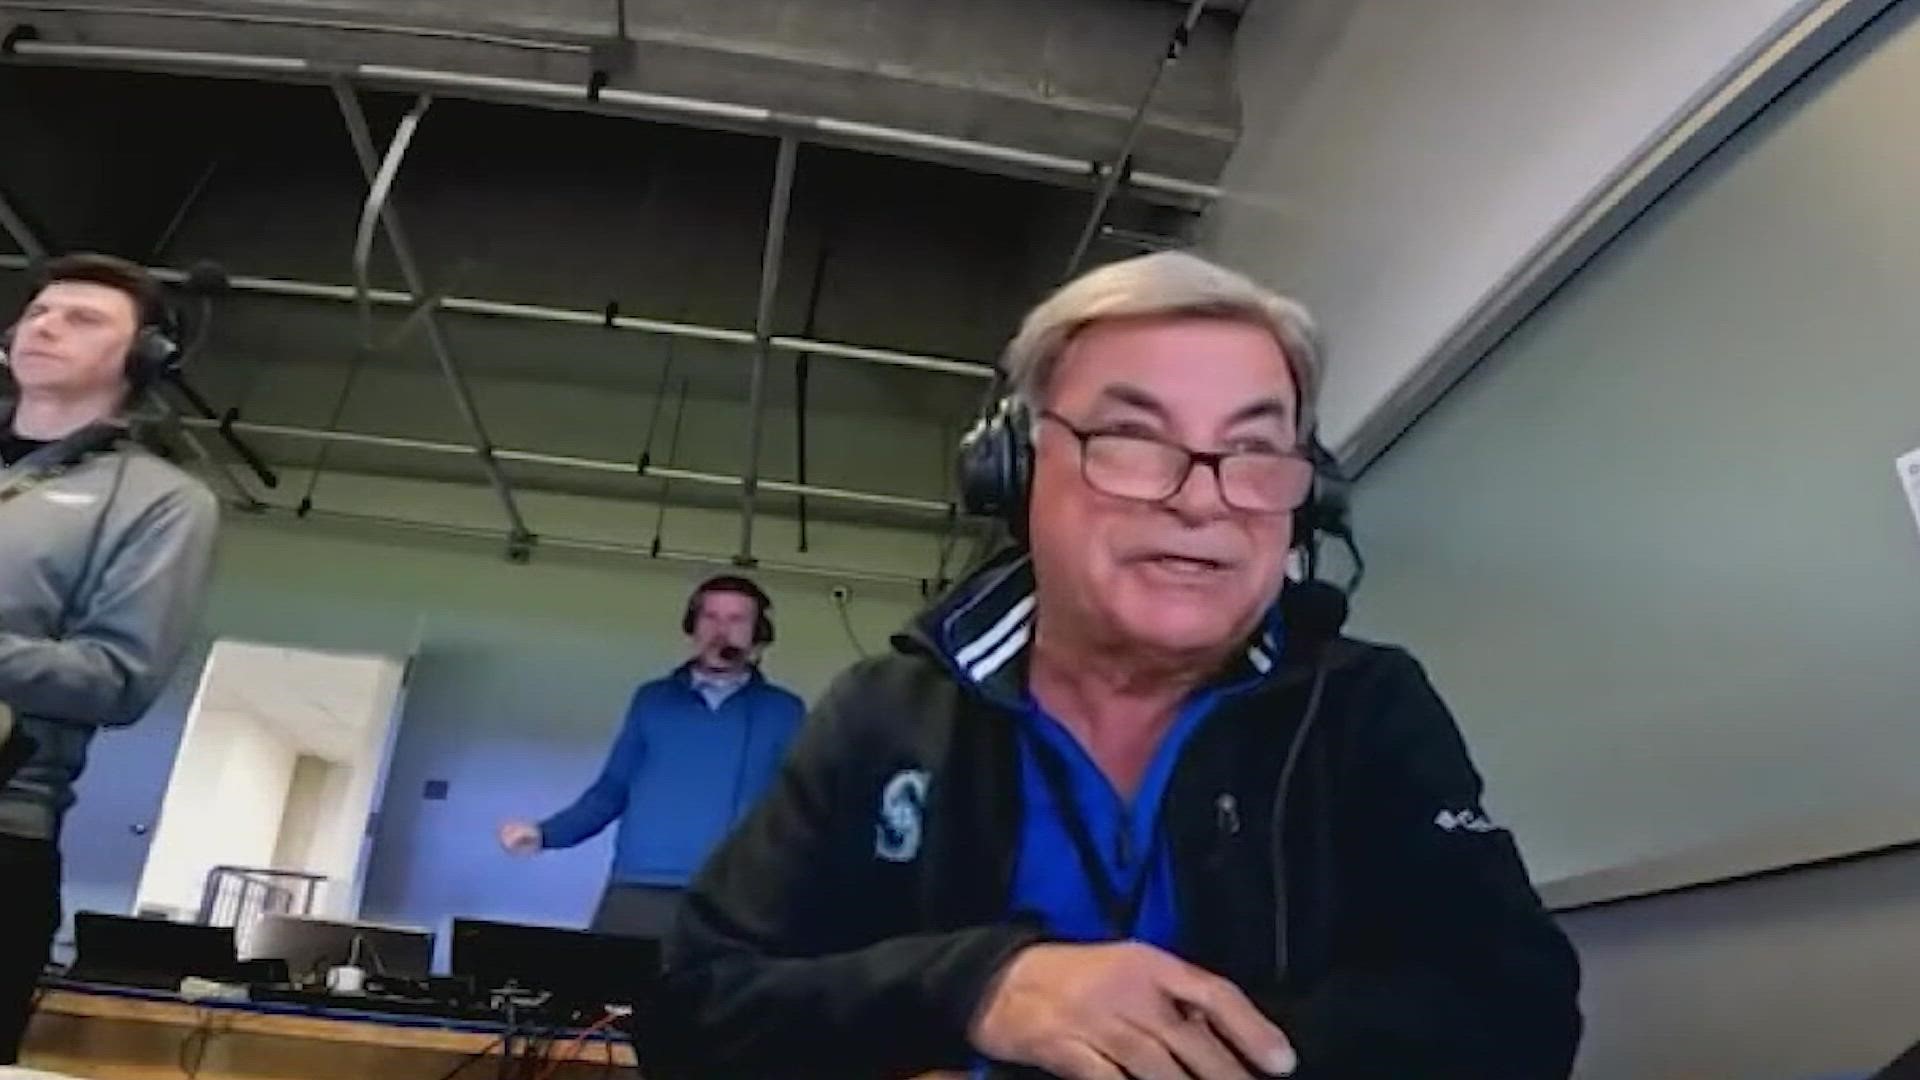 Catching up with legendary Mariners announcer Rick Rizzs on the magical ride that has been the Mariners' 2022 season